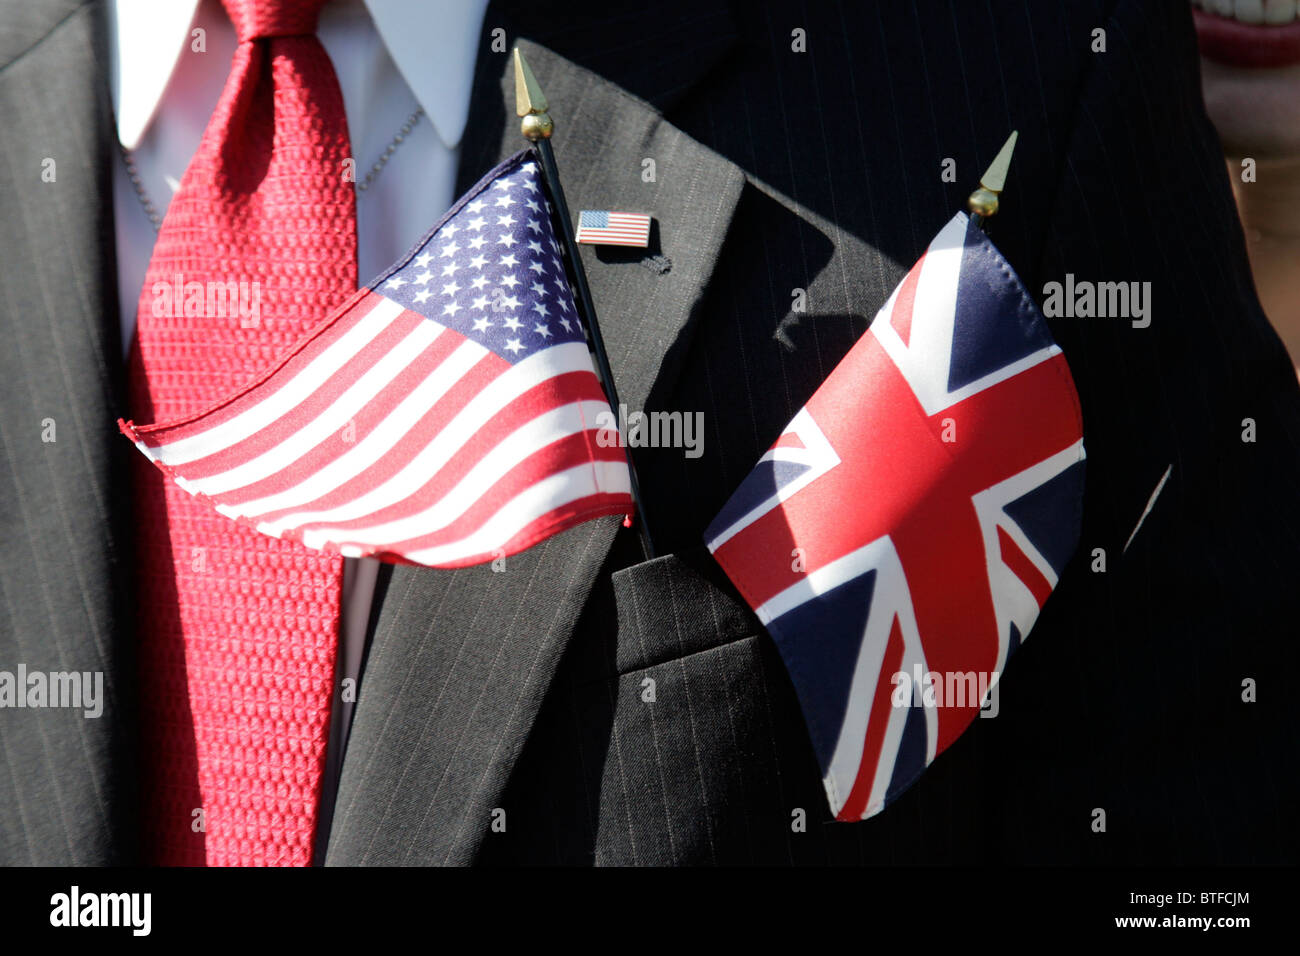 US flag and Union Jack flags symbolic demonstration of detente between USA and UK Stock Photo